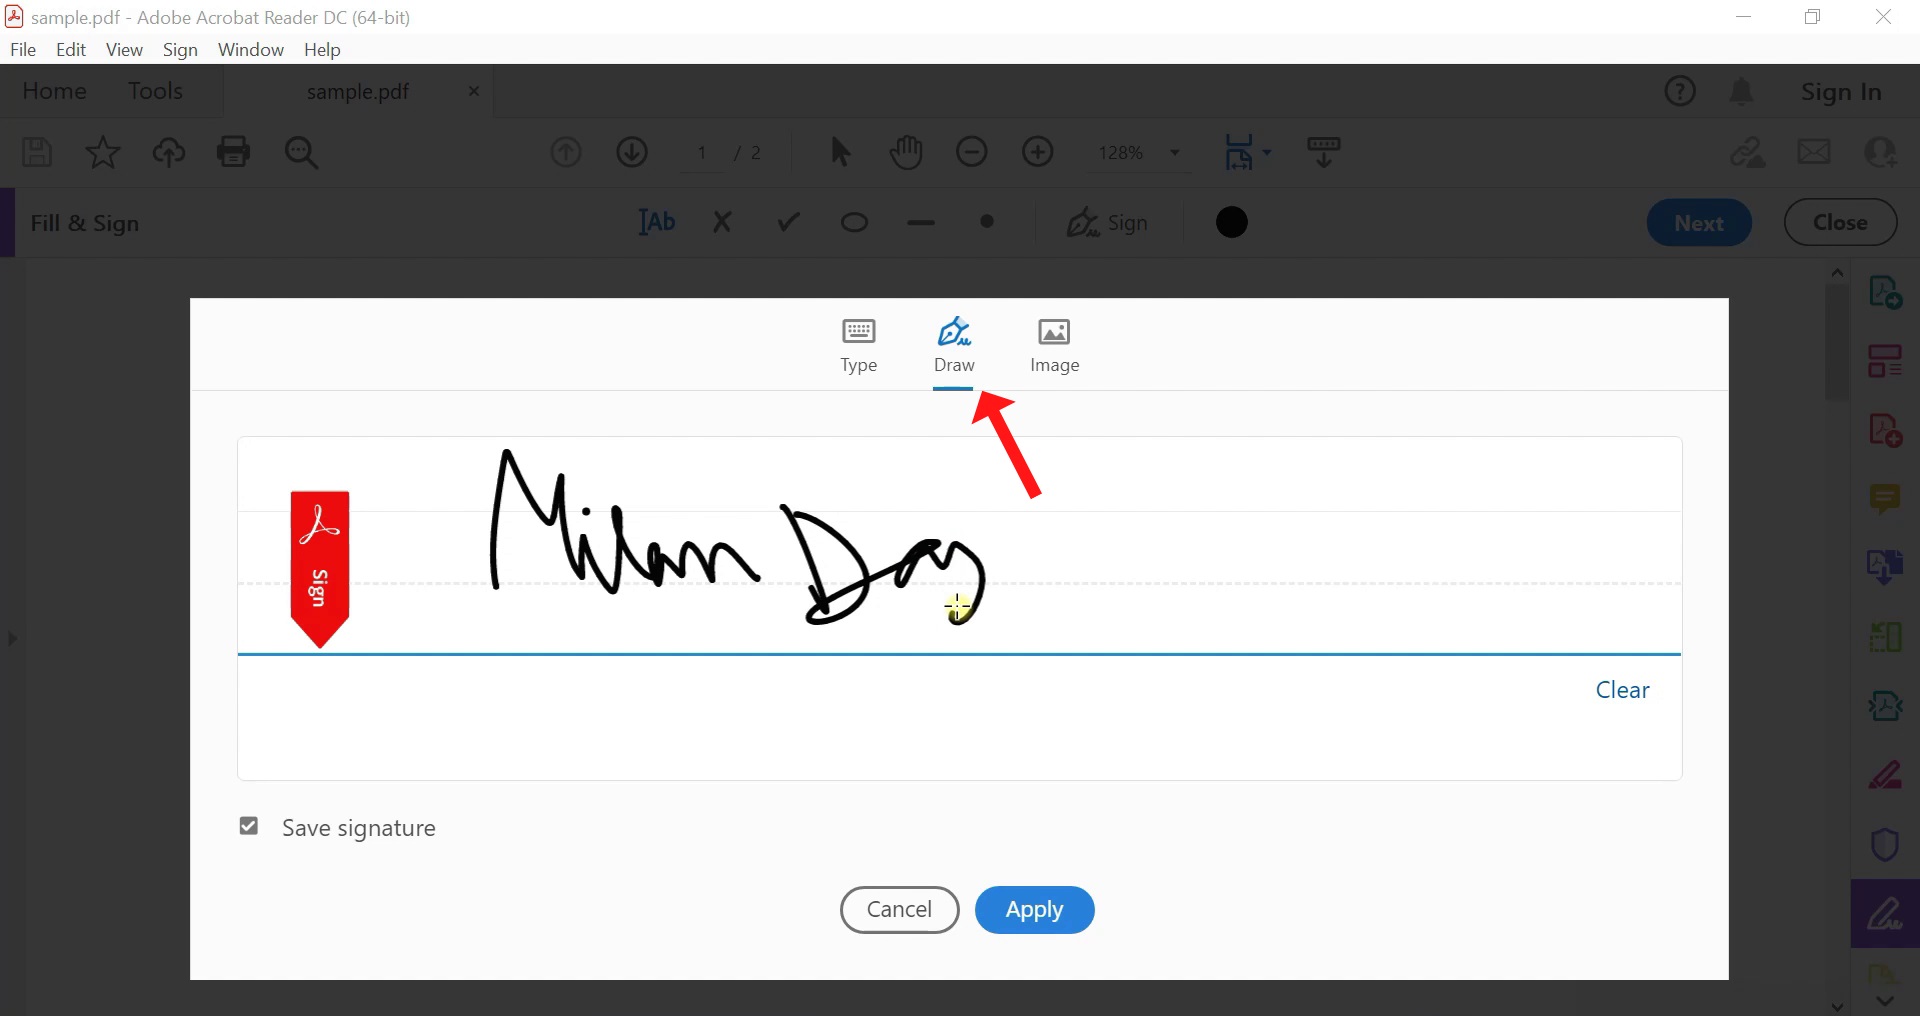 how to add signature to pdf